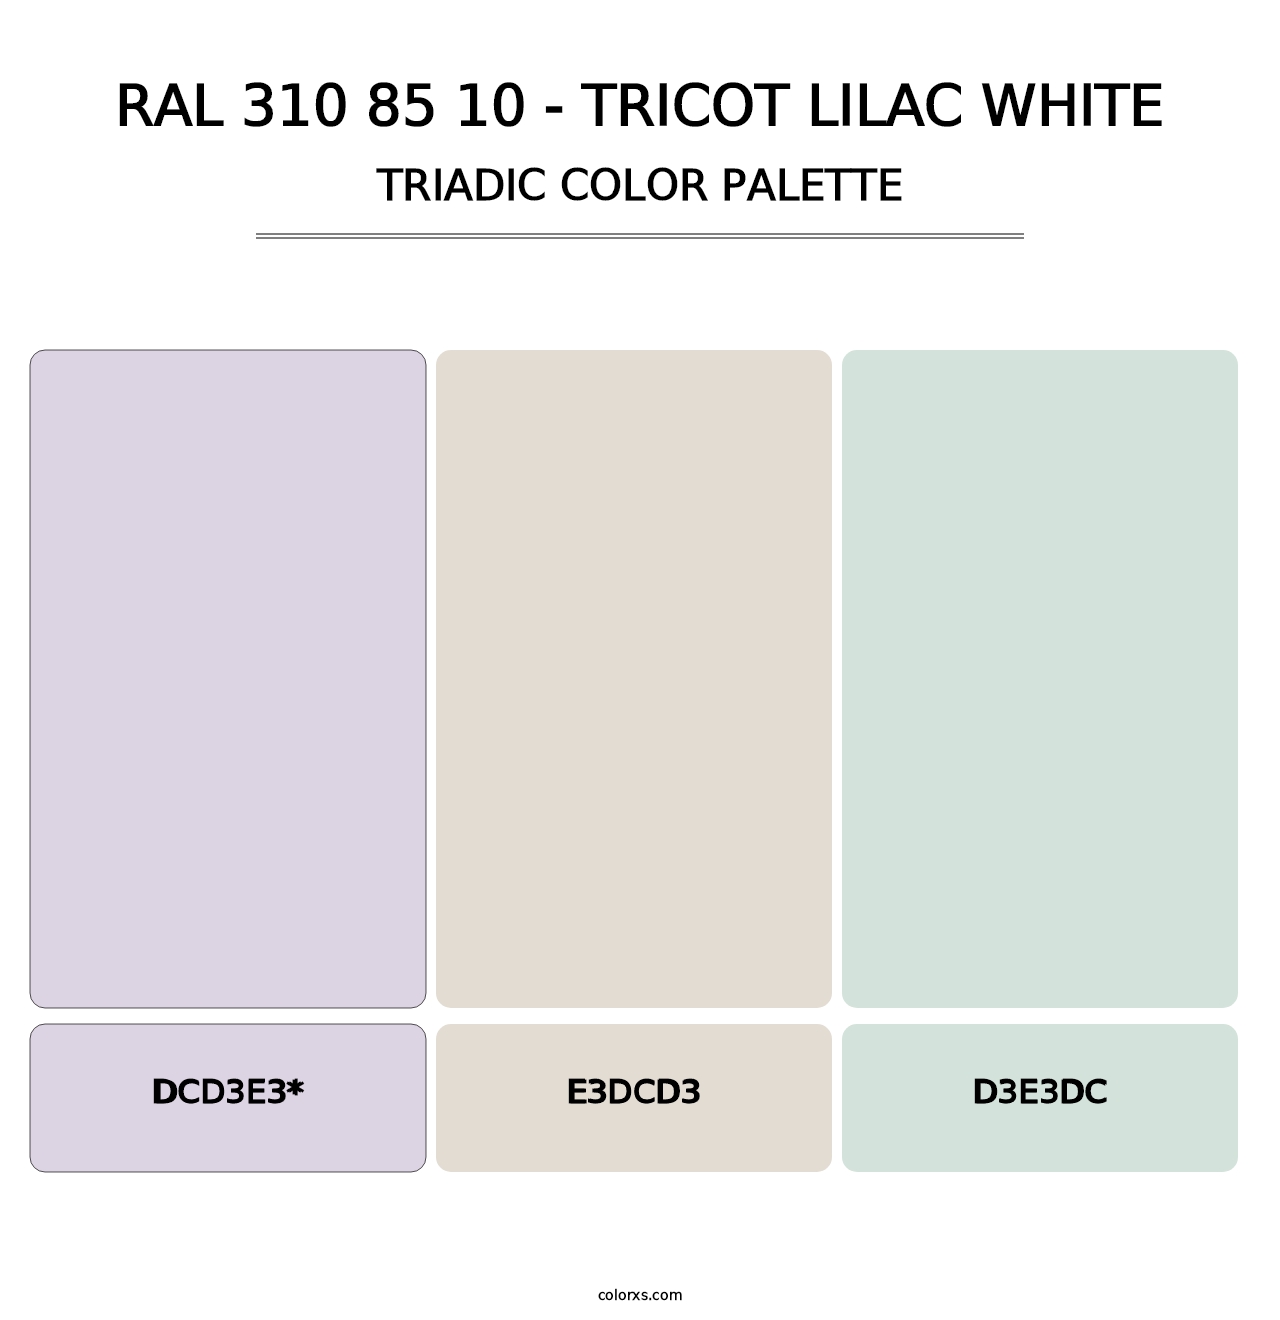 RAL 310 85 10 - Tricot Lilac White - Triadic Color Palette